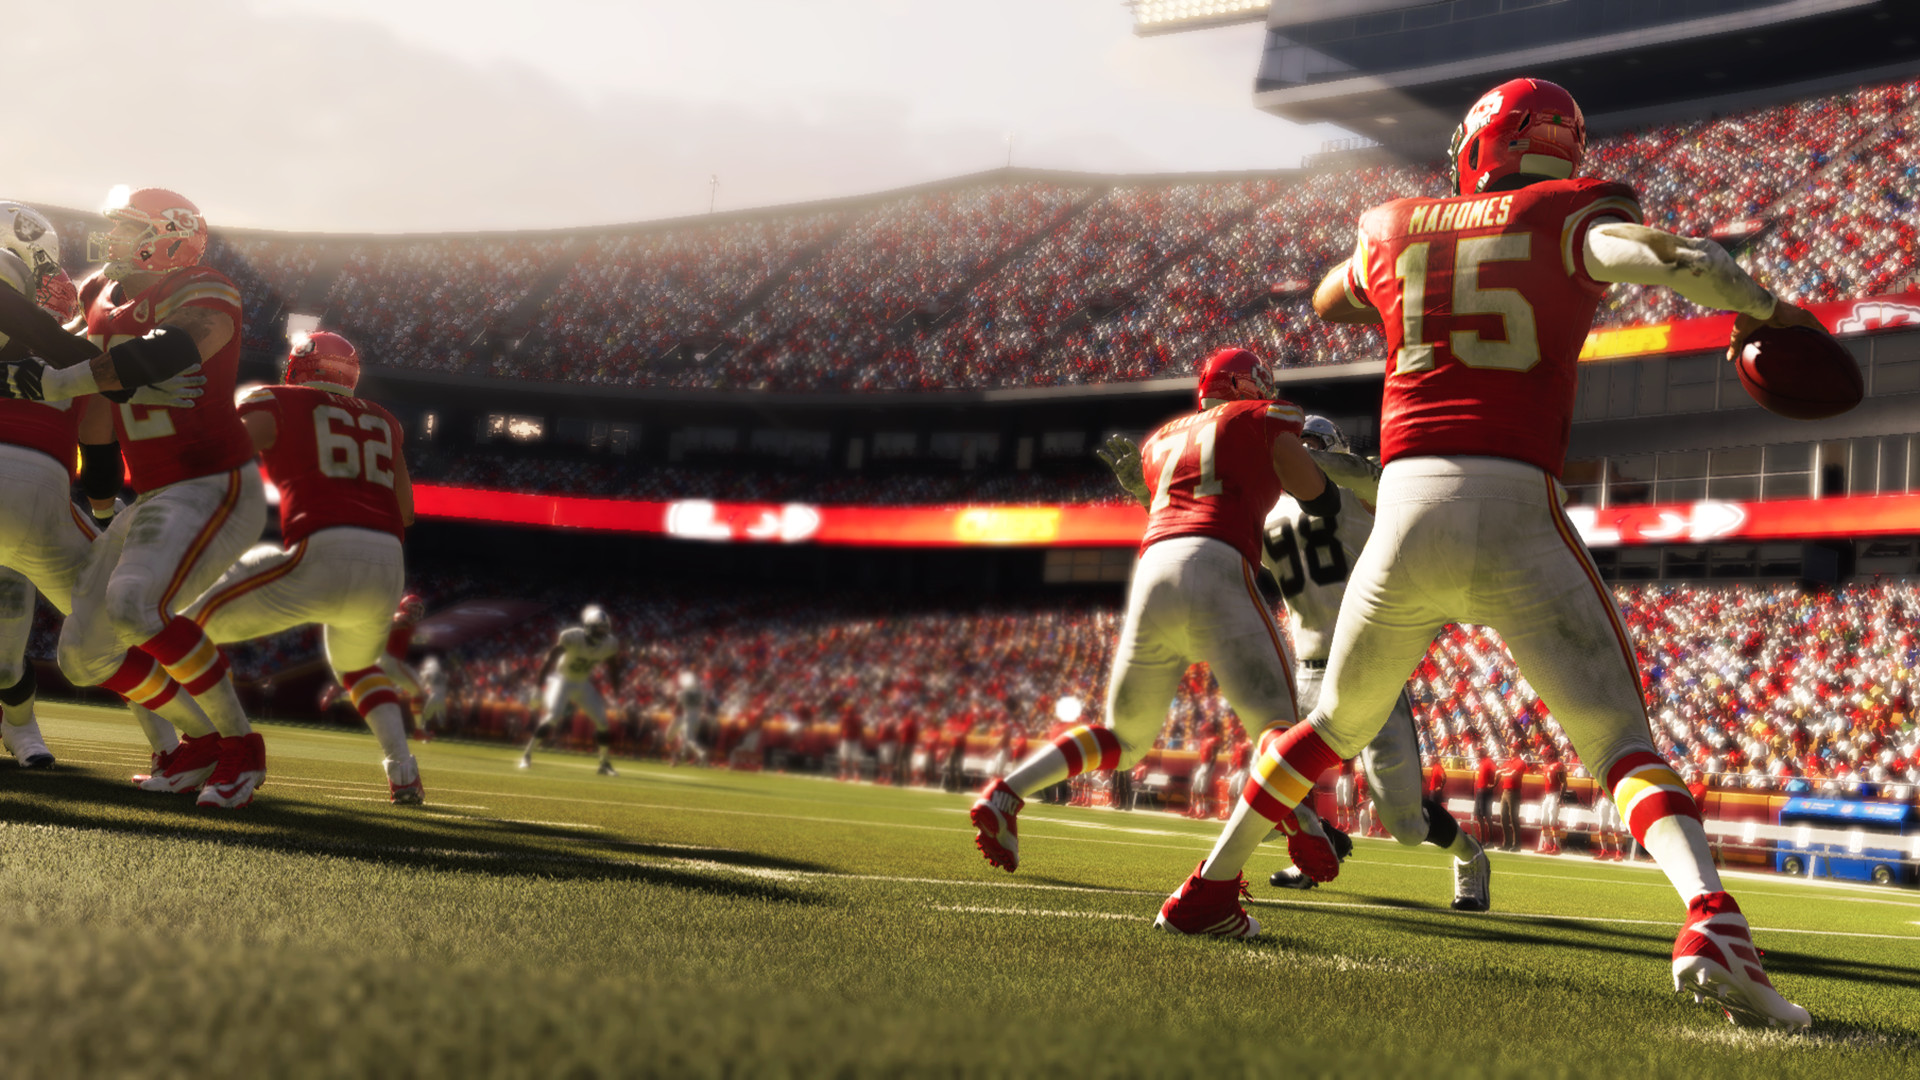 Madden Nfl 21 Boasts Over 460,000 Seasons Already Completed